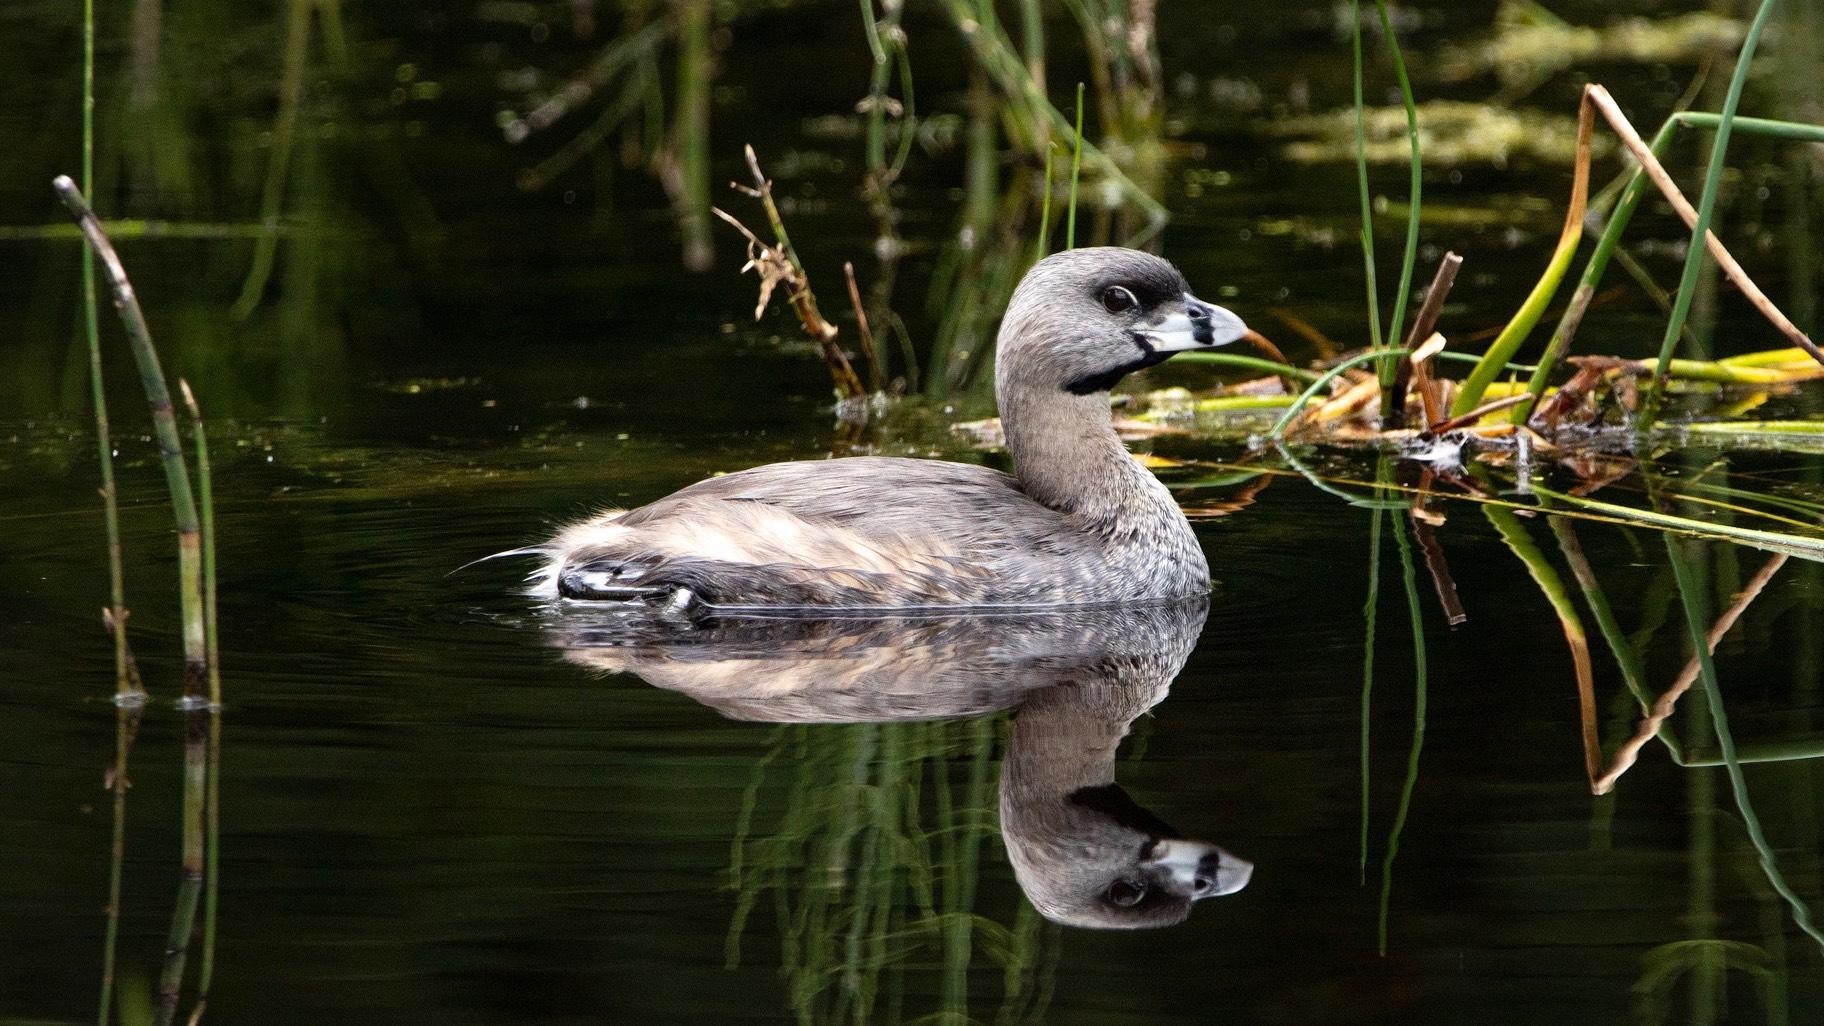 If marsh birds like the pied-billed grebe, pictured, return to Powderhorn Lake, conservationists will judge the wetlands restoration a success. (simardfrancois / Pixabay)